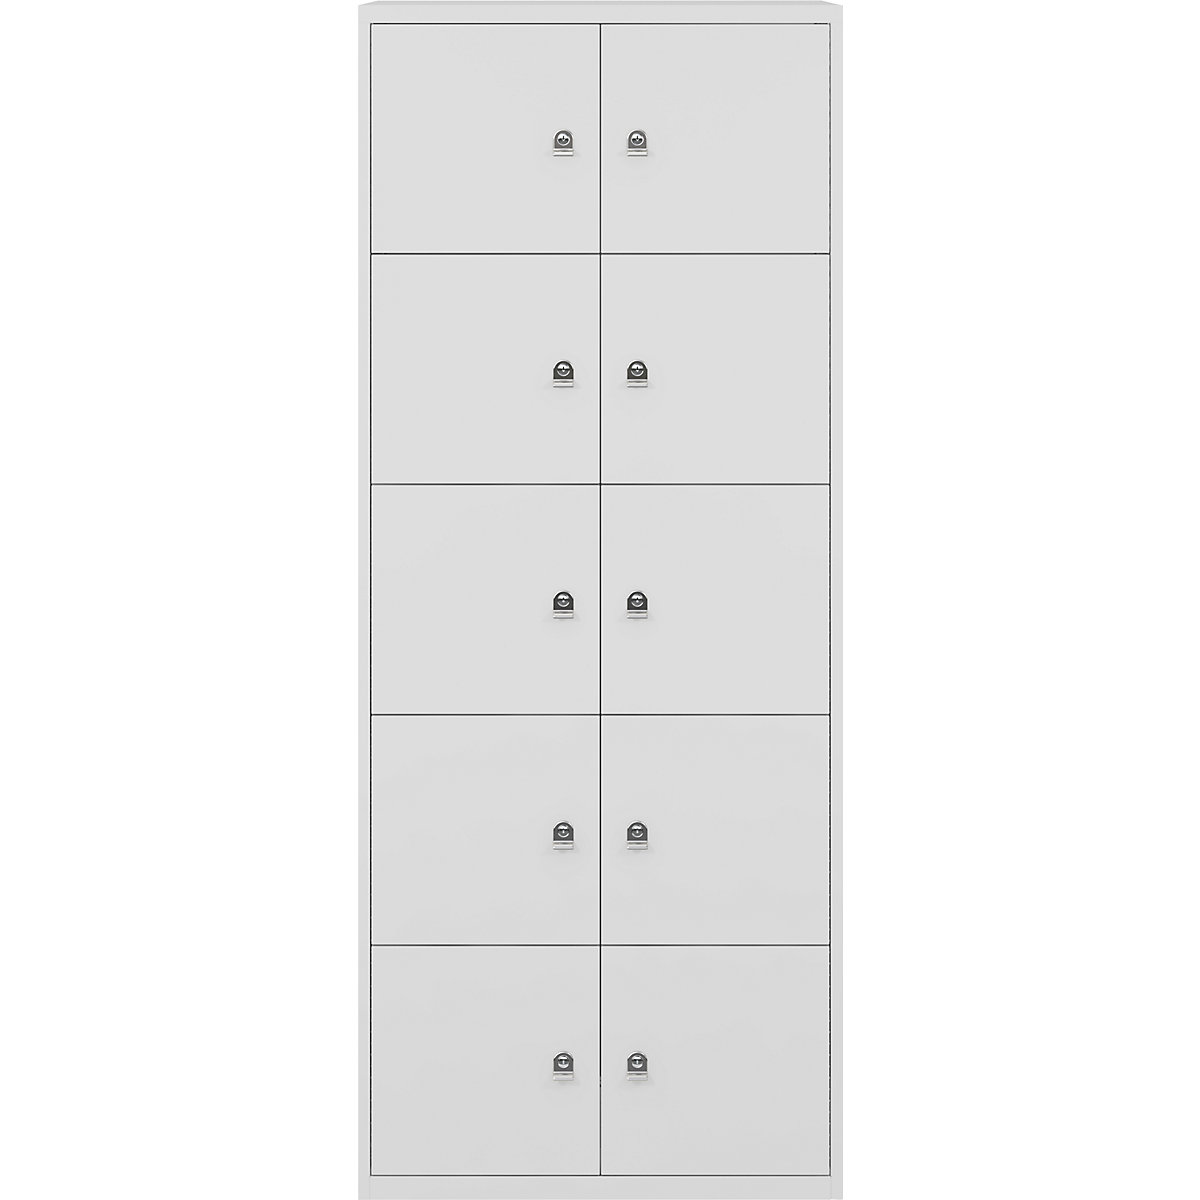 BISLEY – LateralFile™ lodge, with 10 lockable compartments, height 375 mm each, light grey